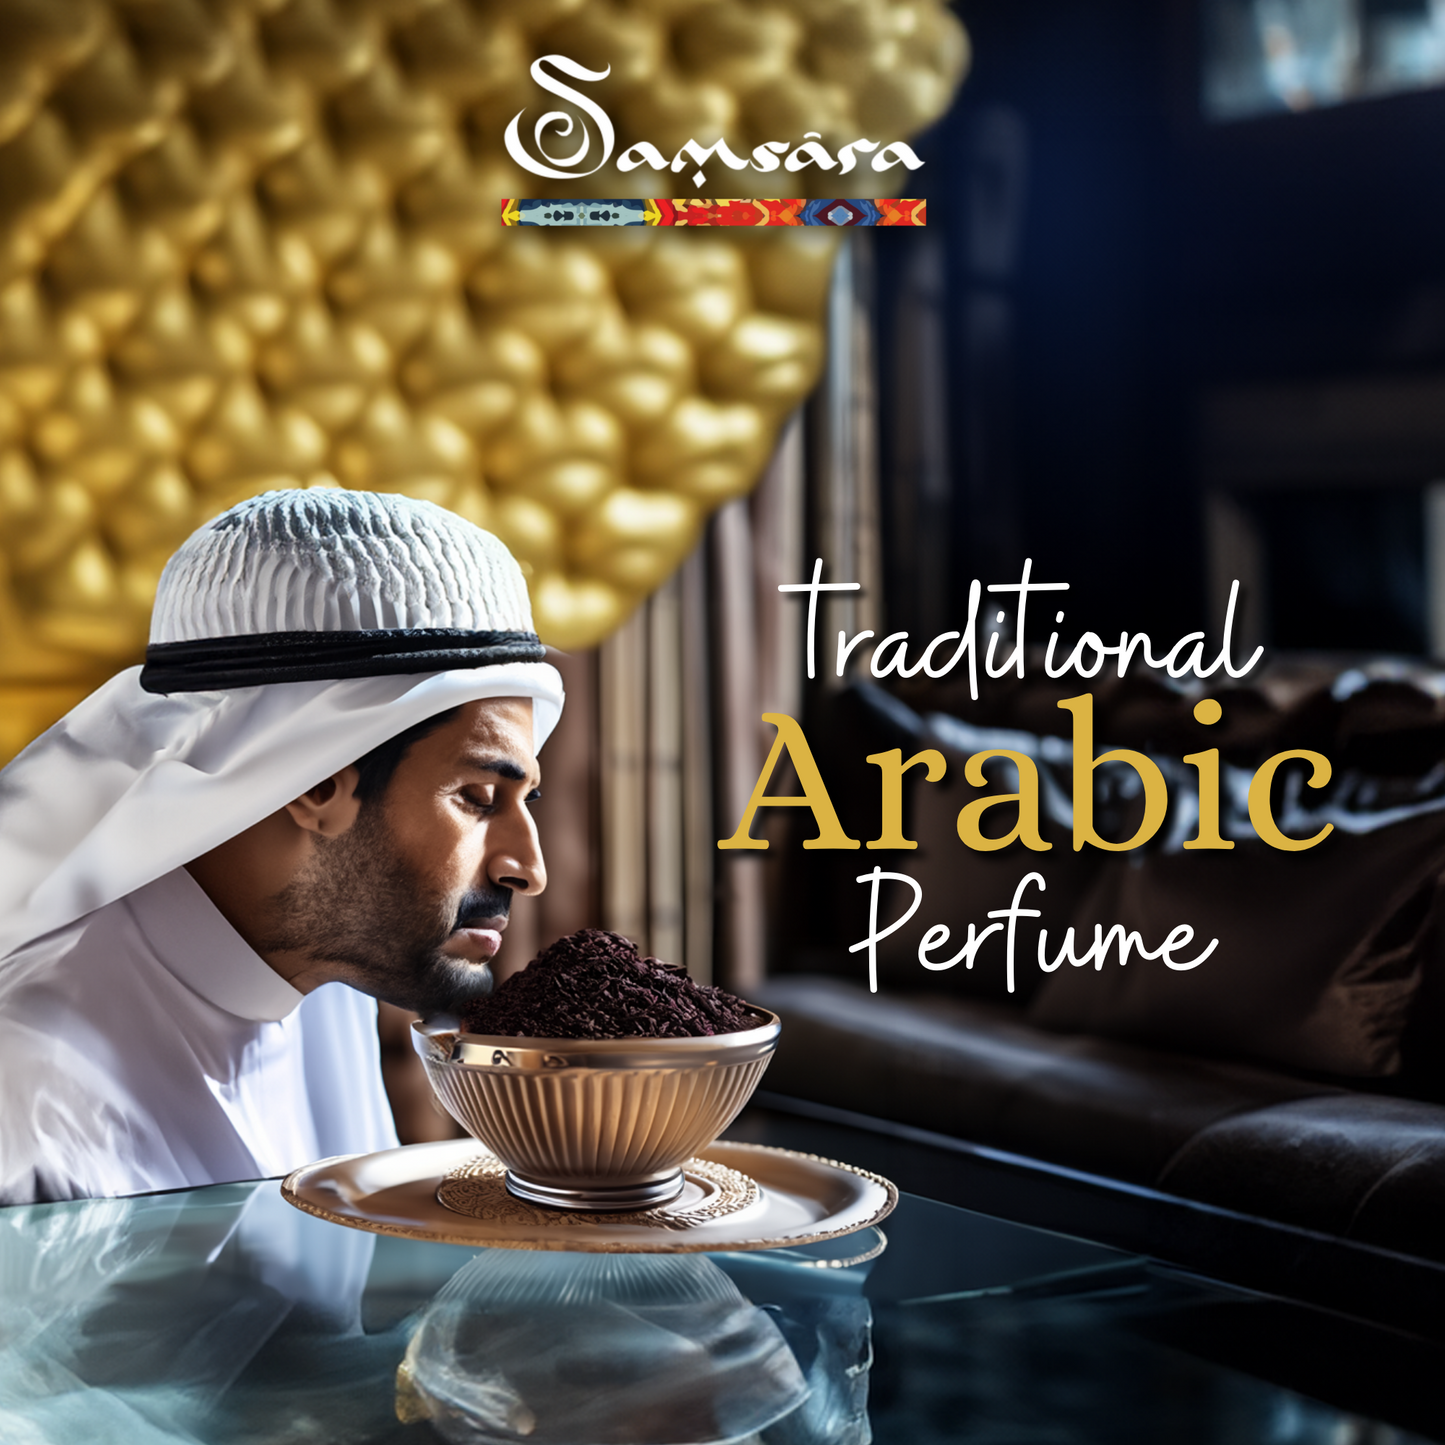 Samsara Solid Arabic perfume Bakhoor with ultra persistent oud wood | Body perfume, hair and clothing - Amber Oud | 20g - Made in Dubai